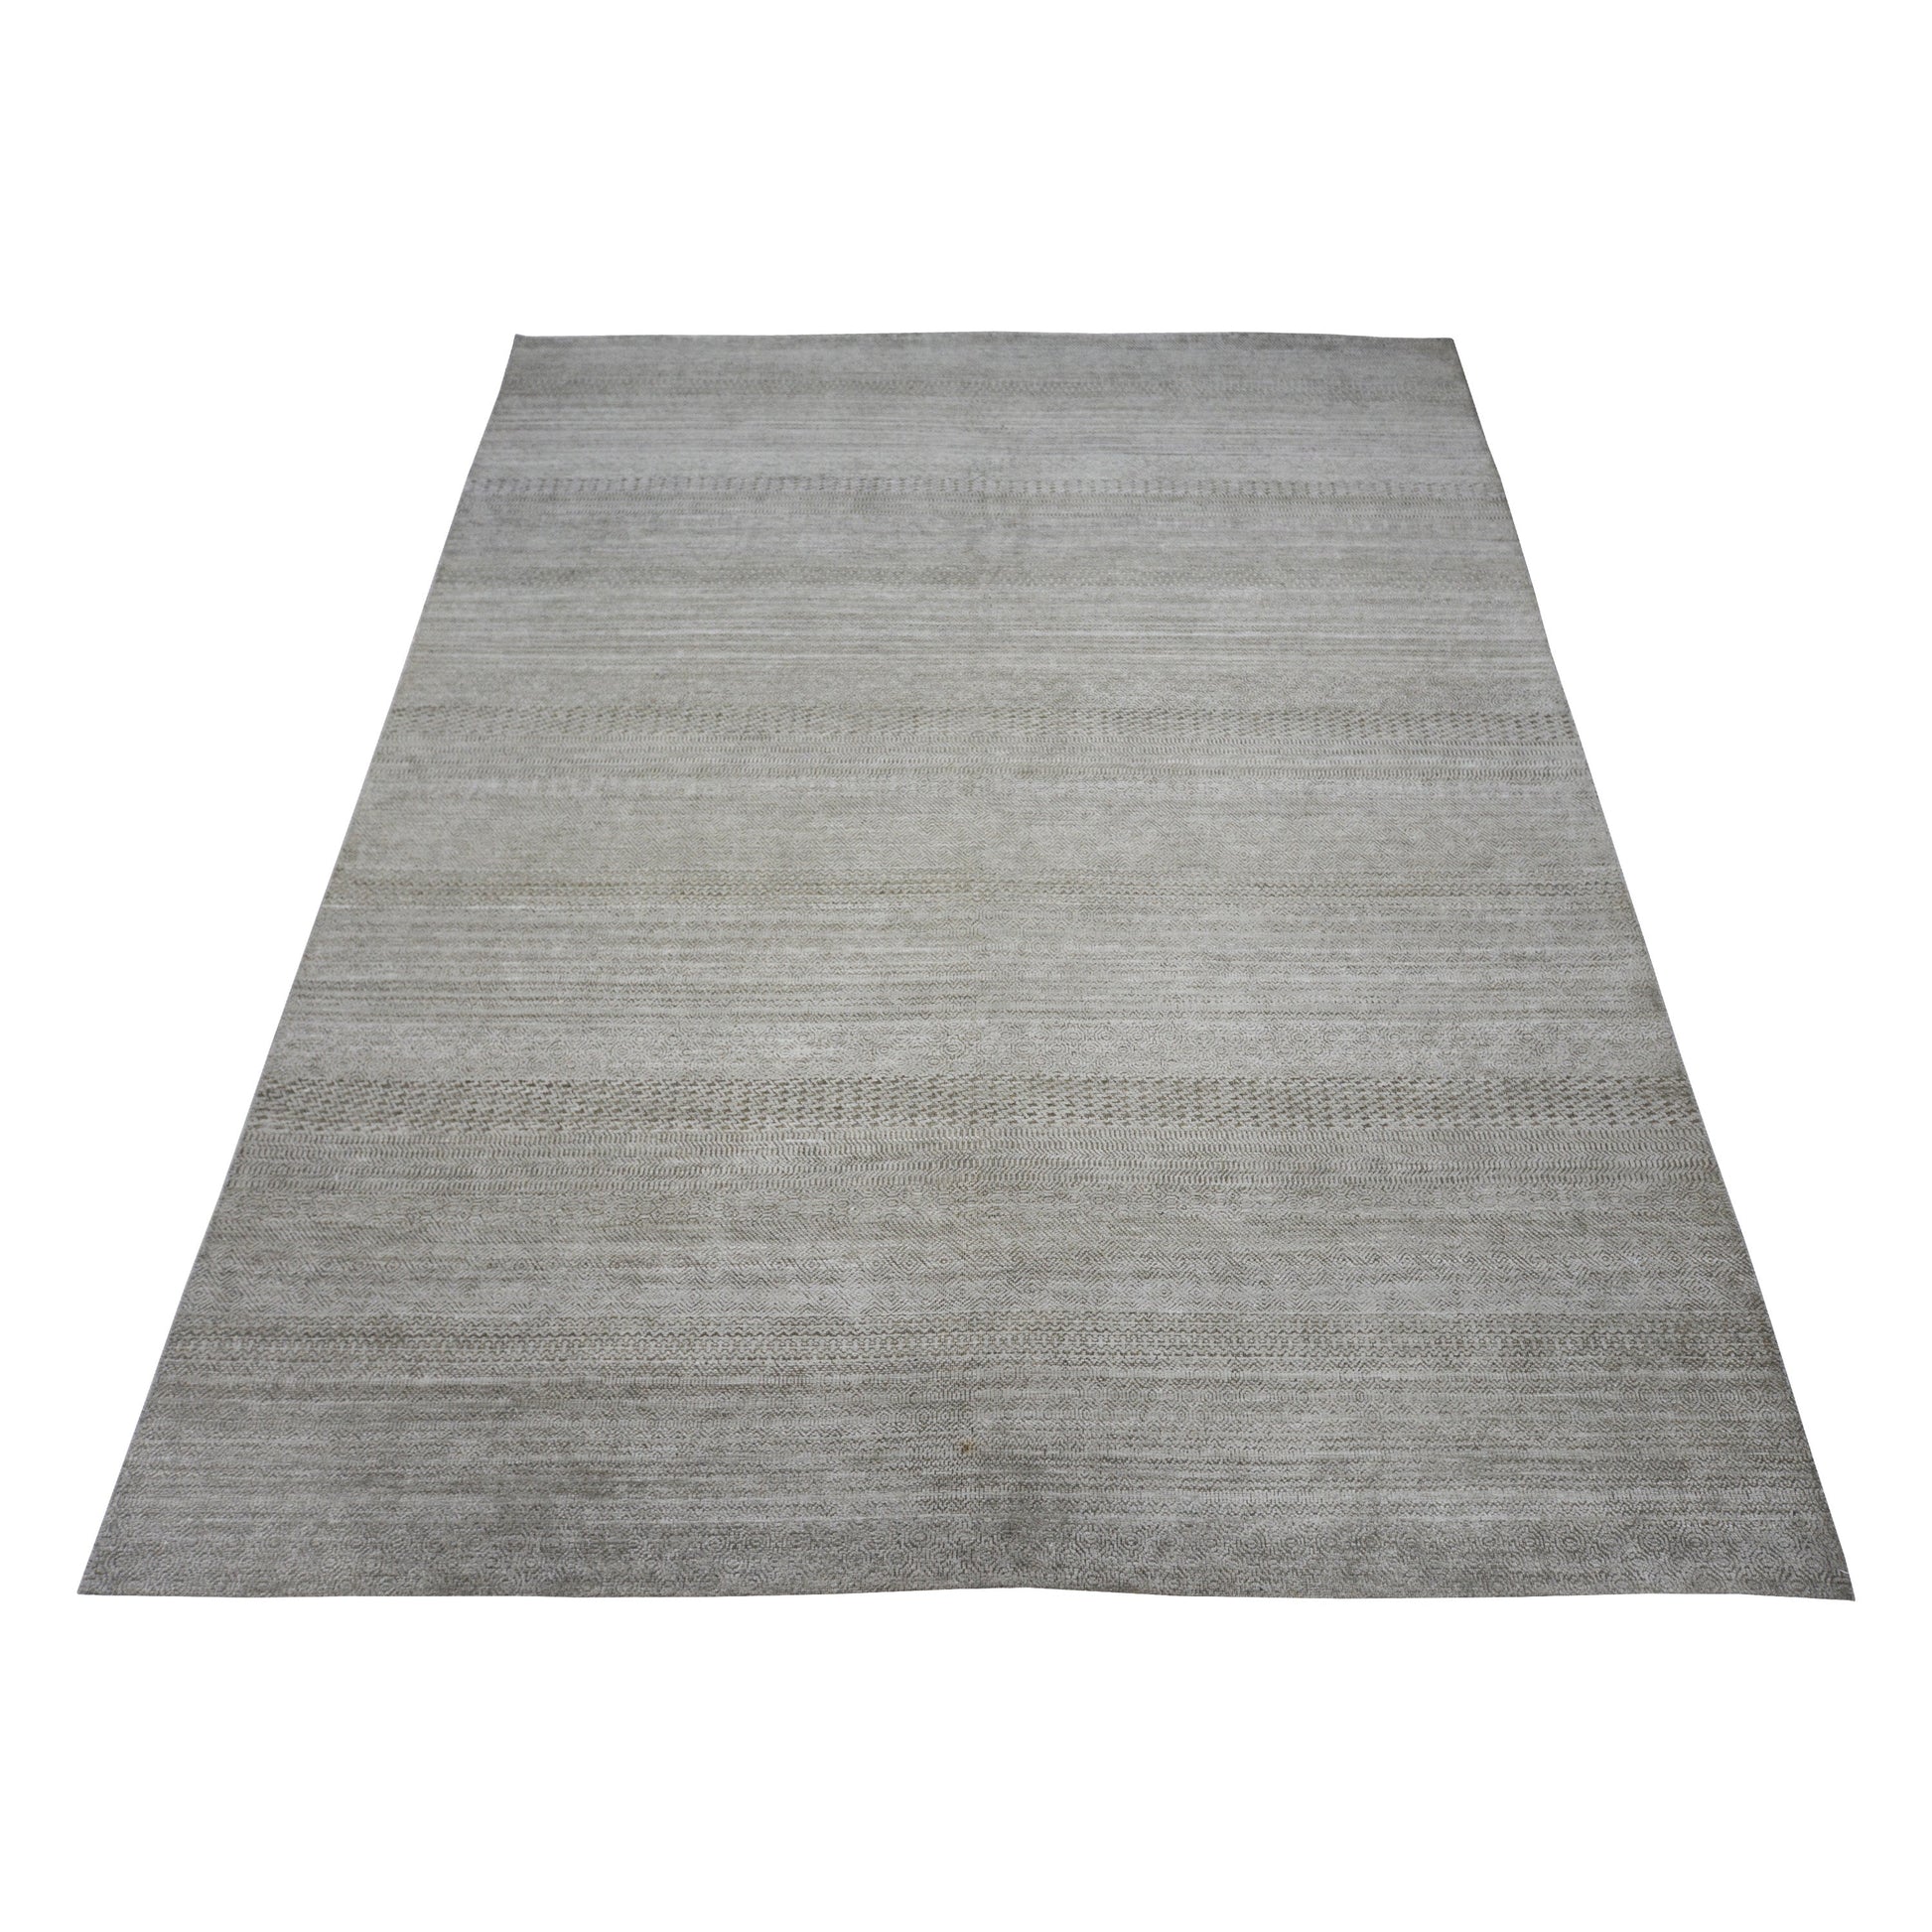 Get trendy with Modern Grass Beige and Grey Silk and Wool Handknotted Area Rug - Modern Rugs available at Jaipur Oriental Rugs. Grab yours for $4135.00 today!